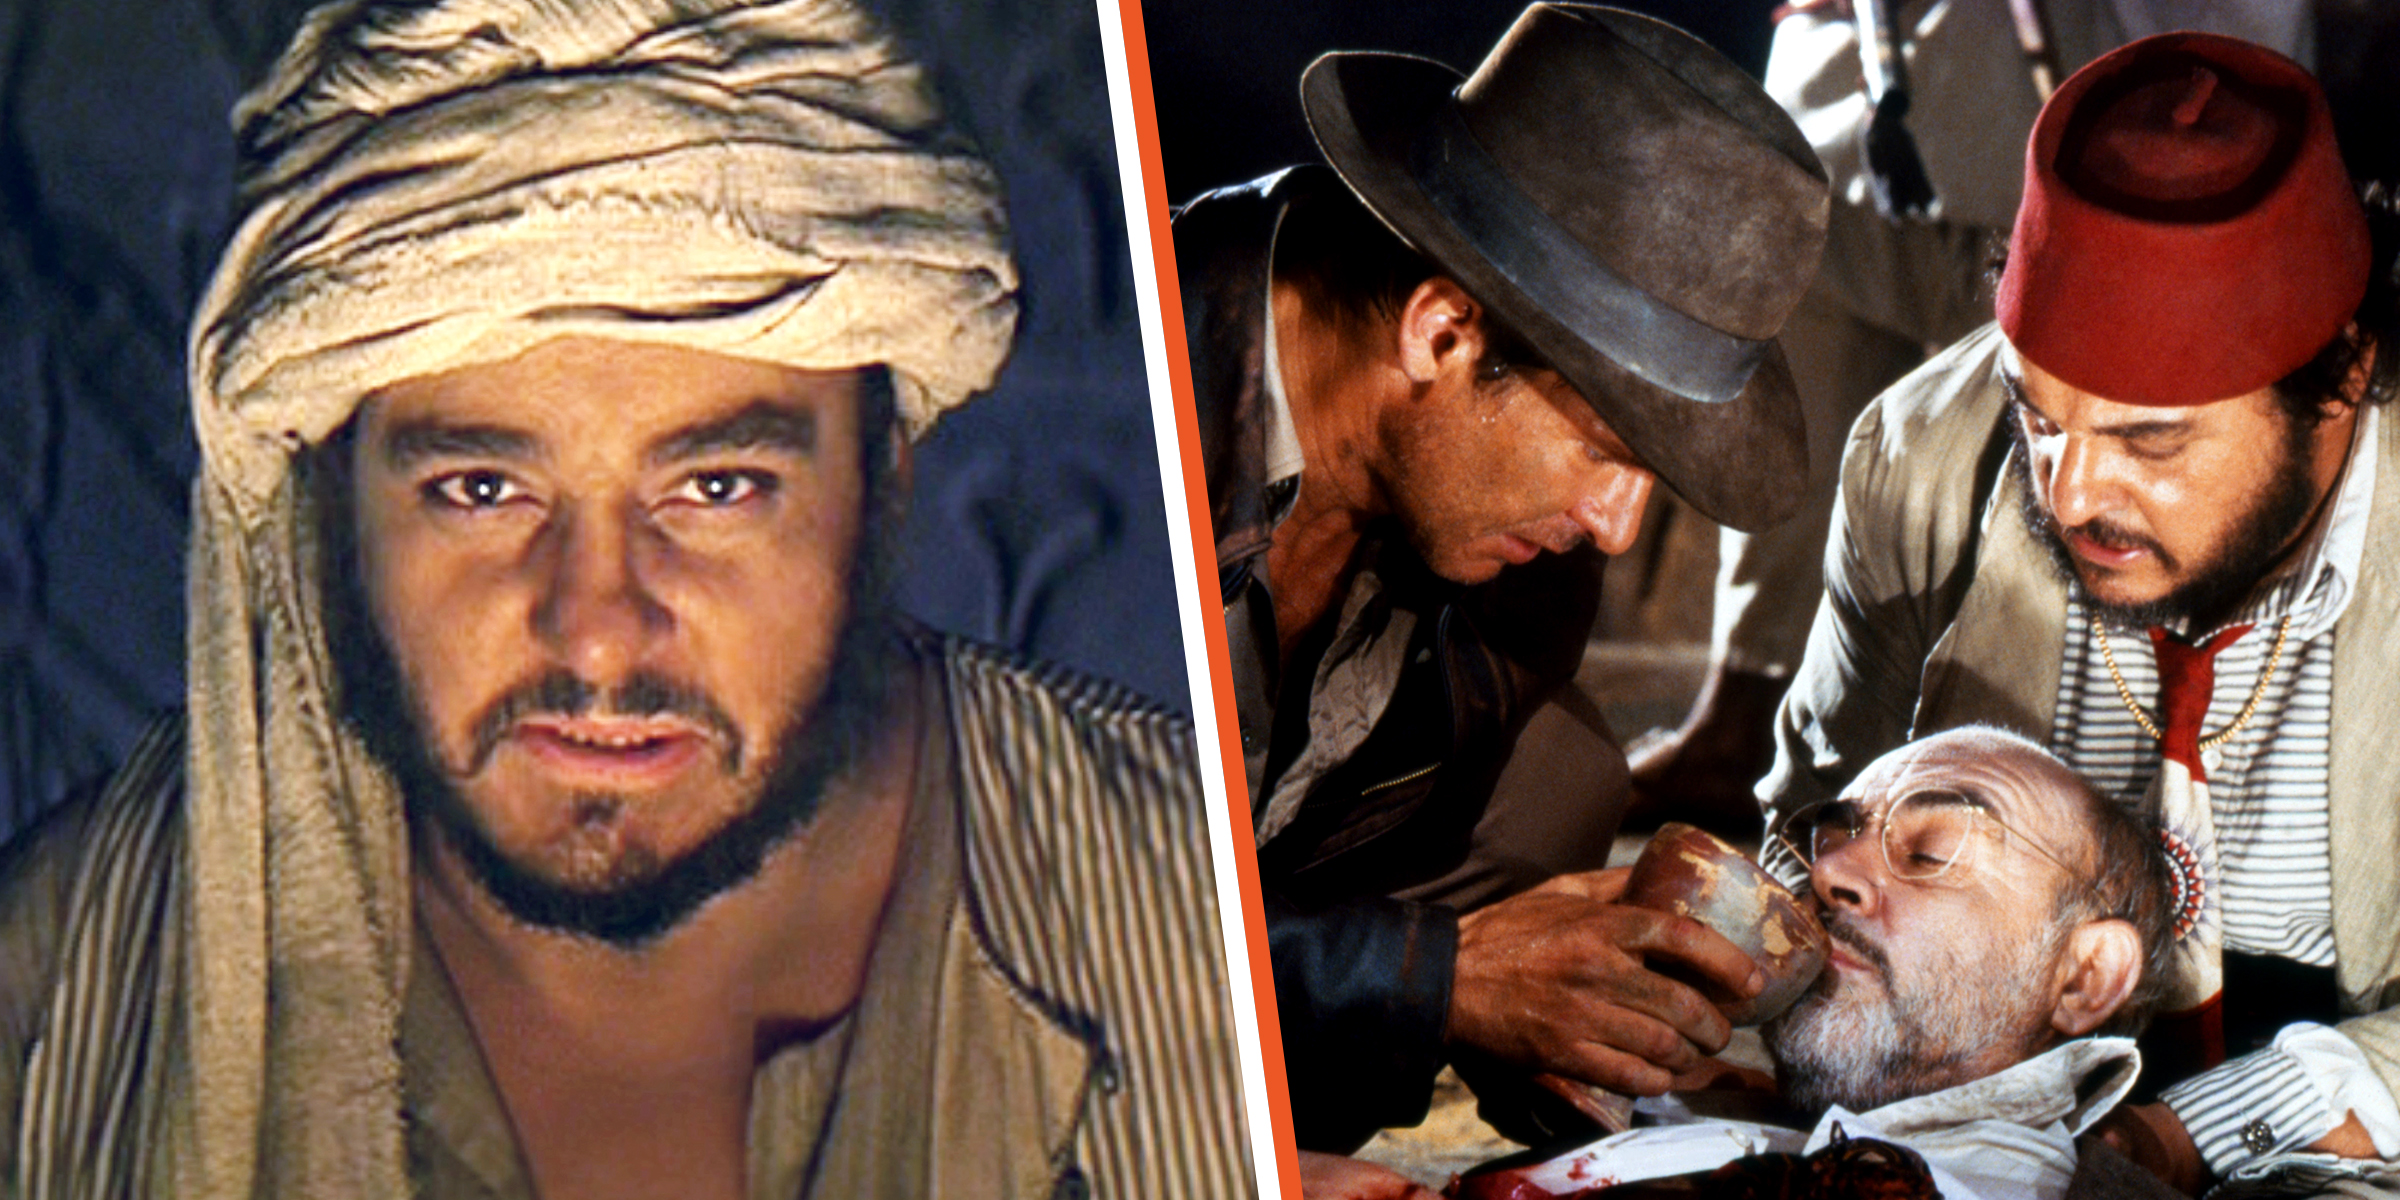 John Rhys-Davies as Sallah in the "Indiana Jones" movies | Source: Getty Images